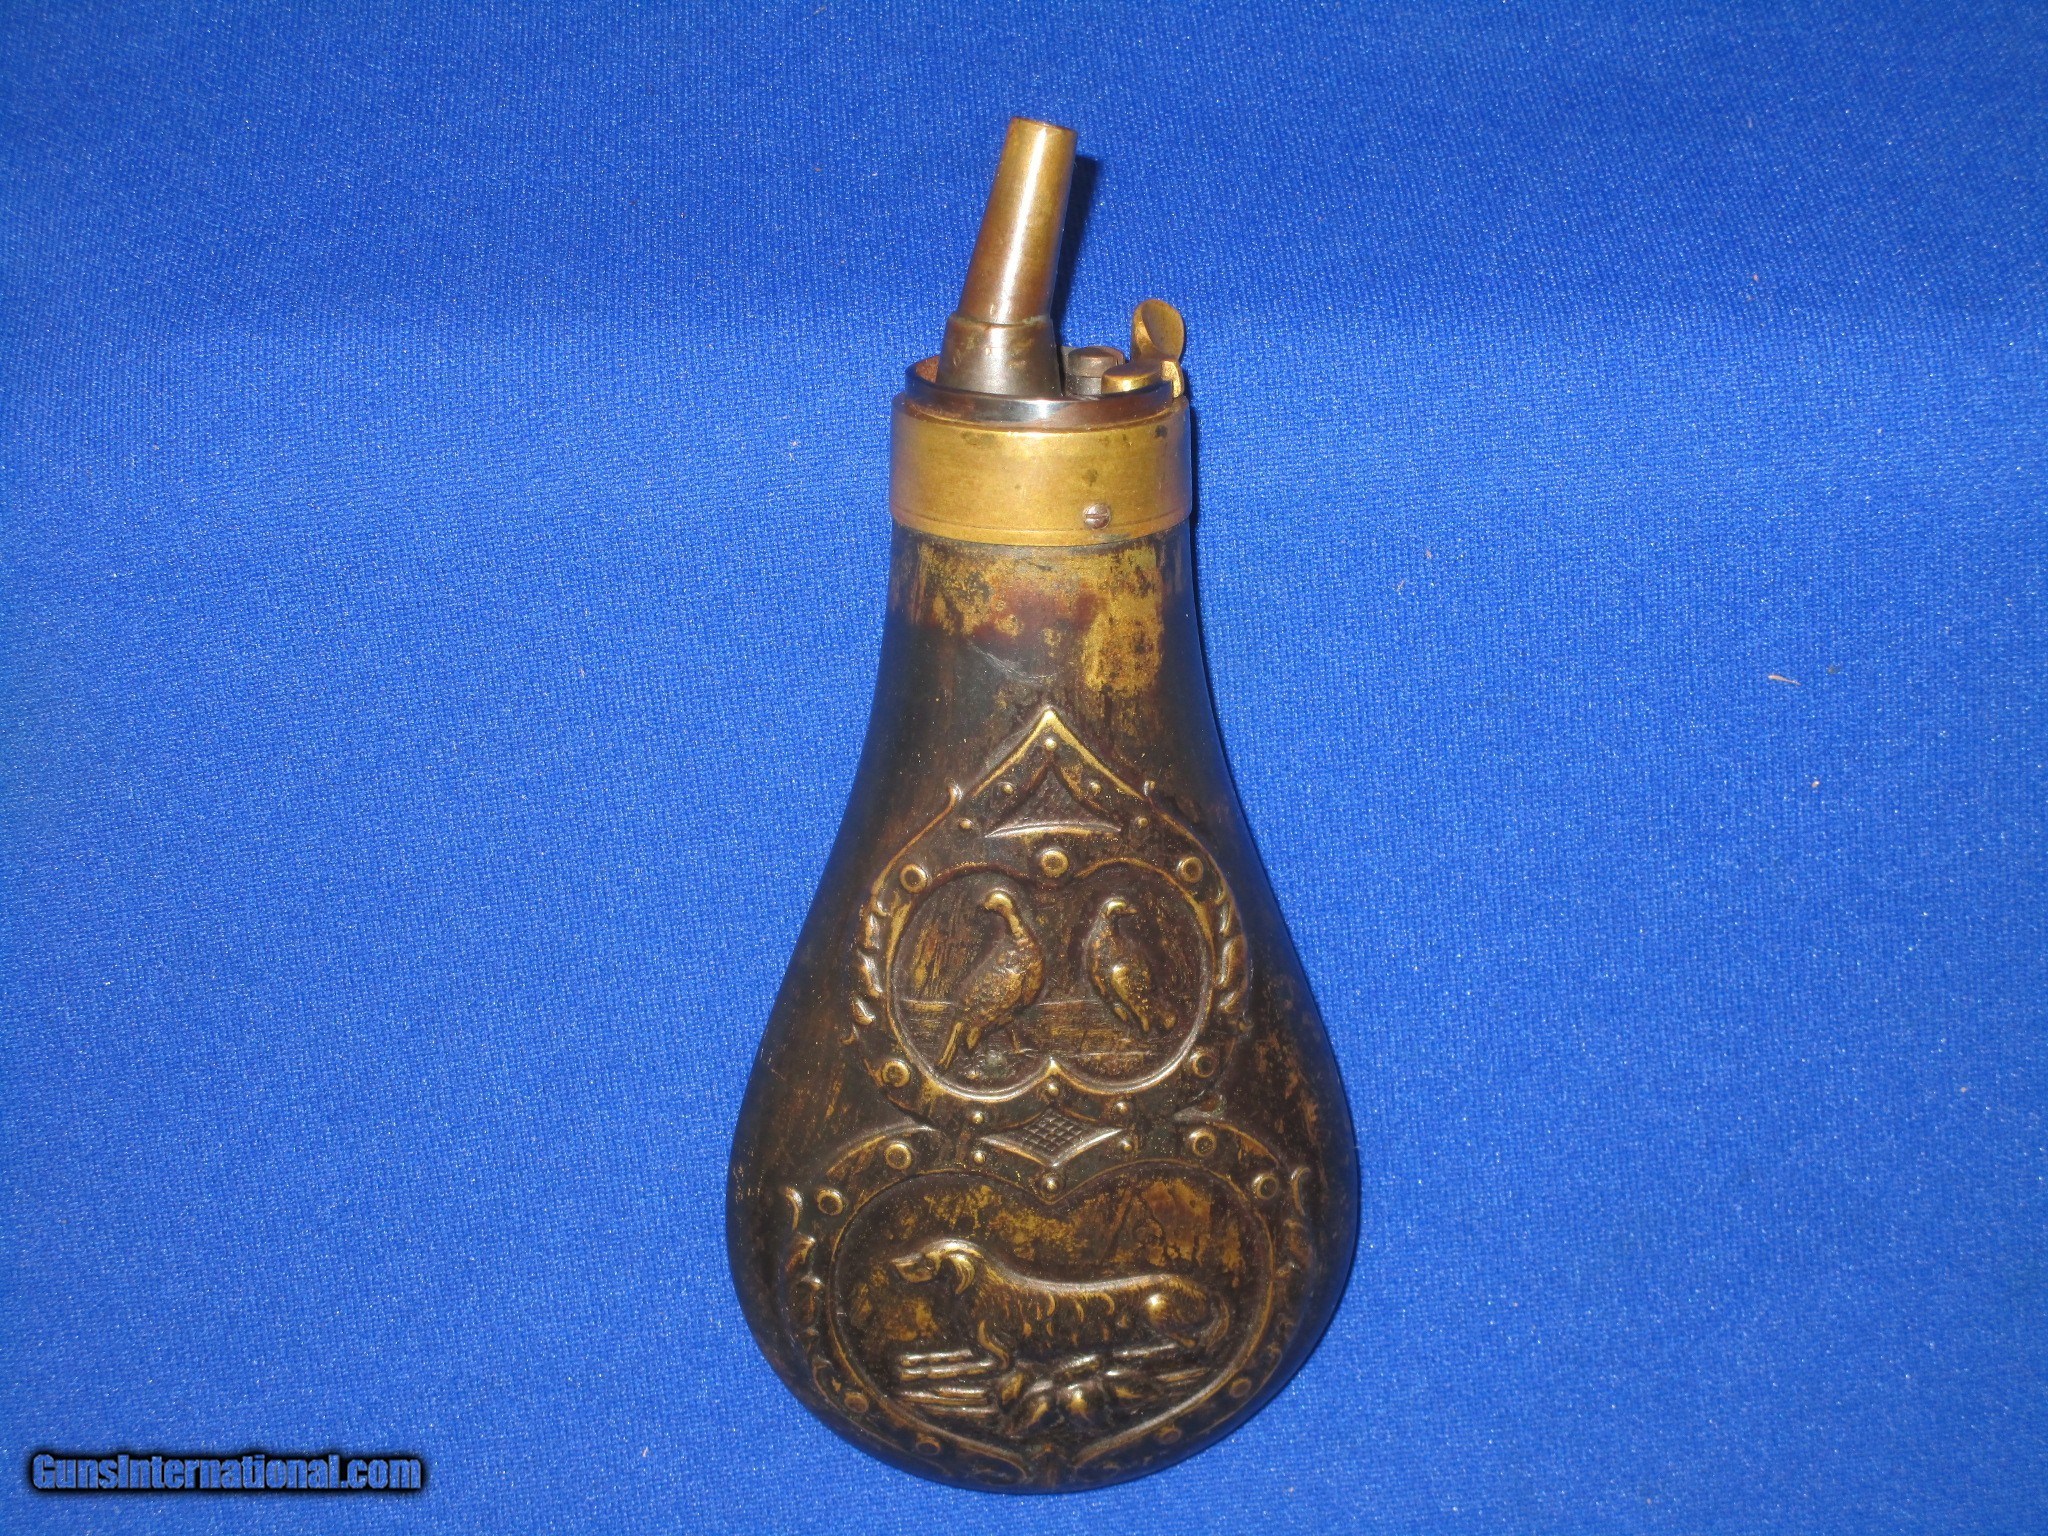 https://images.gunsinternational.com/listings_sub/acc_116456/gi_101498917/A-CIVIL-WAR-REMINGTON-PERCUSSION-ARMY-OR-NAVY-REVOLVER-POWDER-FLASK-IN-VERY-GOOD-UNTOUCHED-CONDITION_101498917_116456_912A9275FC3D9762.JPG